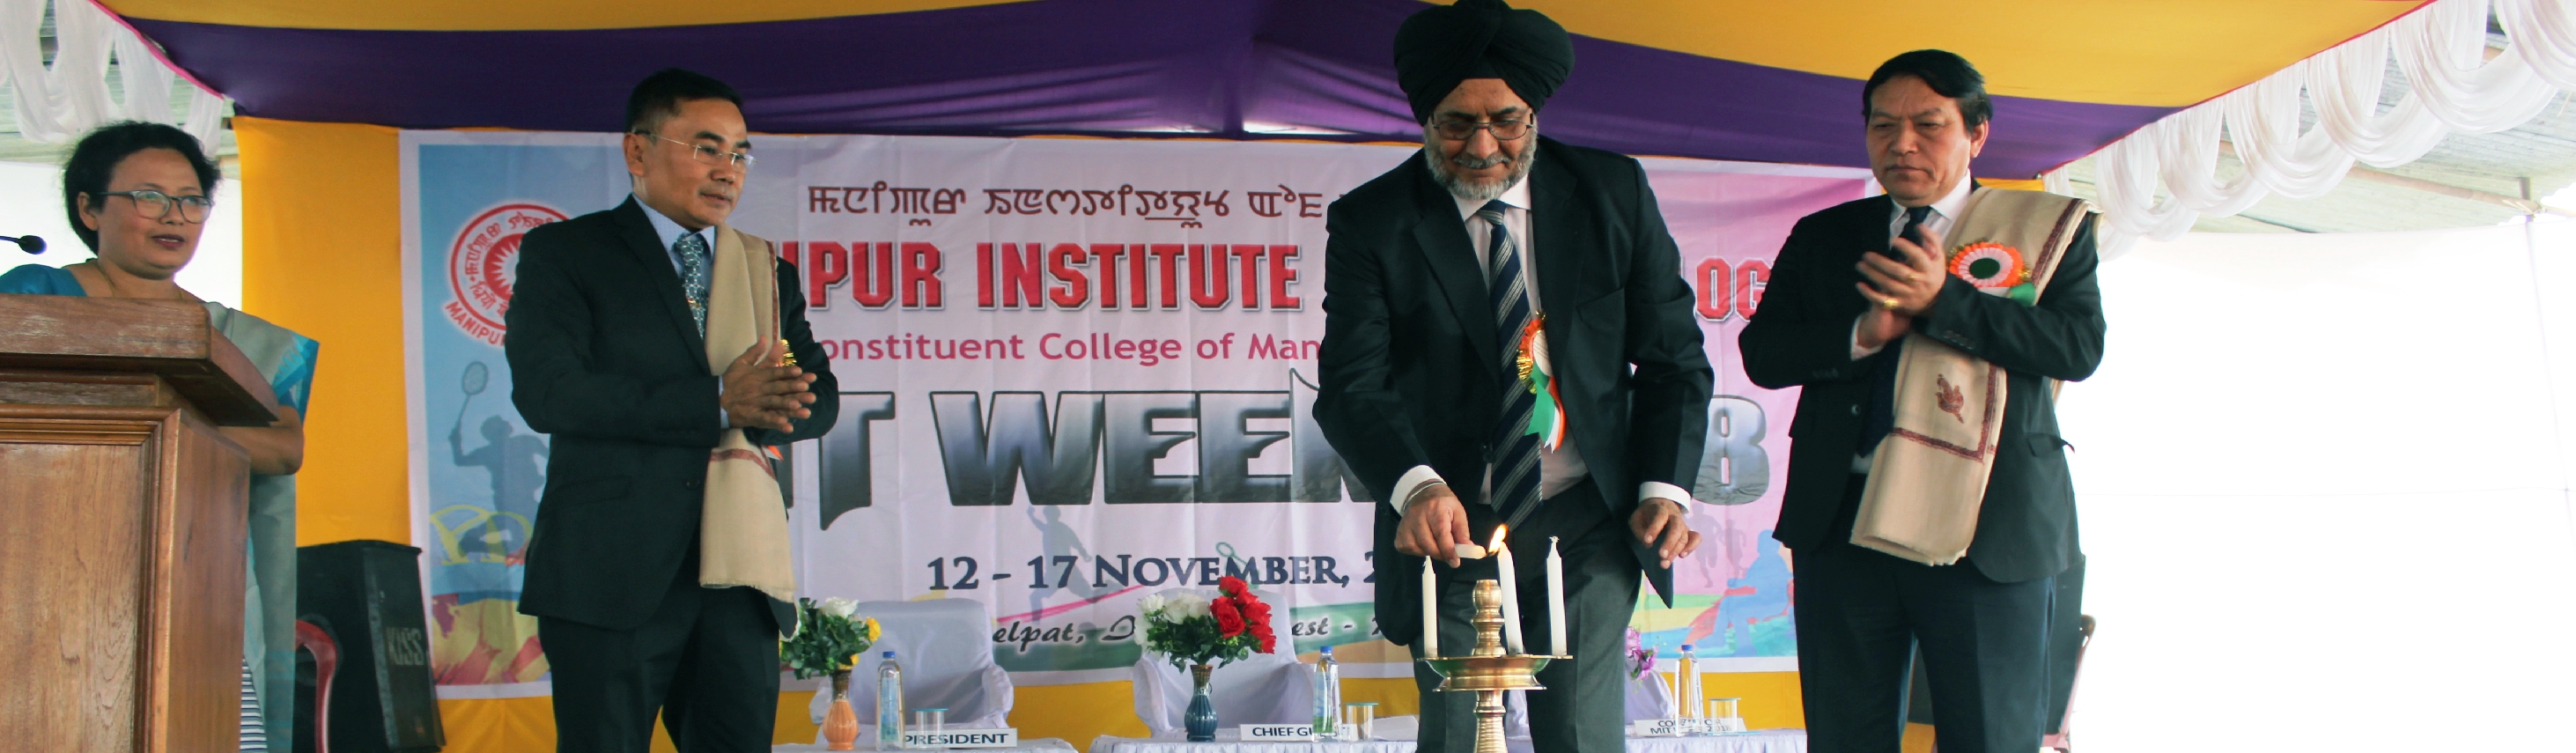 LIGHTING THE CANDLE BY SHRI JARNAIL SINGH, ADMINISTRATOR, MANIPUR UNIVERSITY AT THE VALEDICTORY FUNCTION OF MIT WEEK 2018 ON 17th NOV, 2018